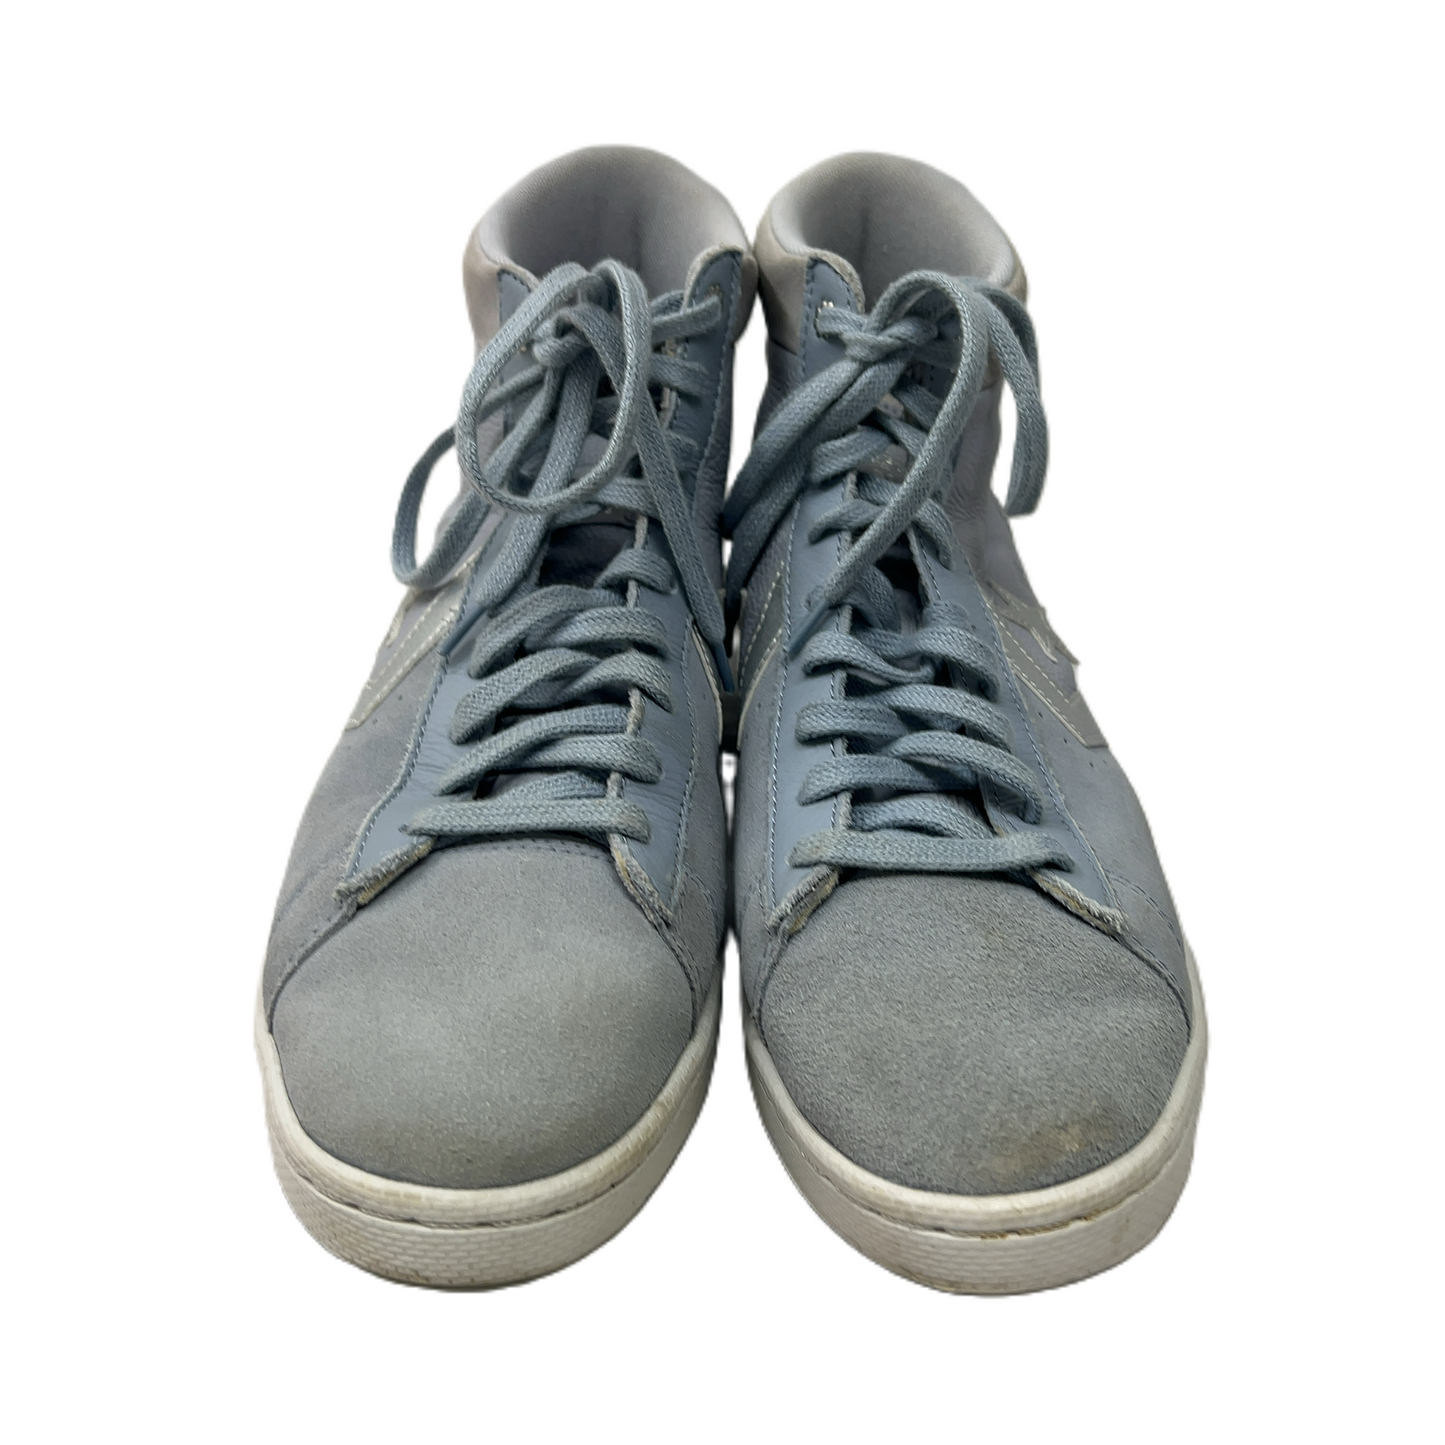 Shoes Sneakers Platform By Converse  Size: 10.5